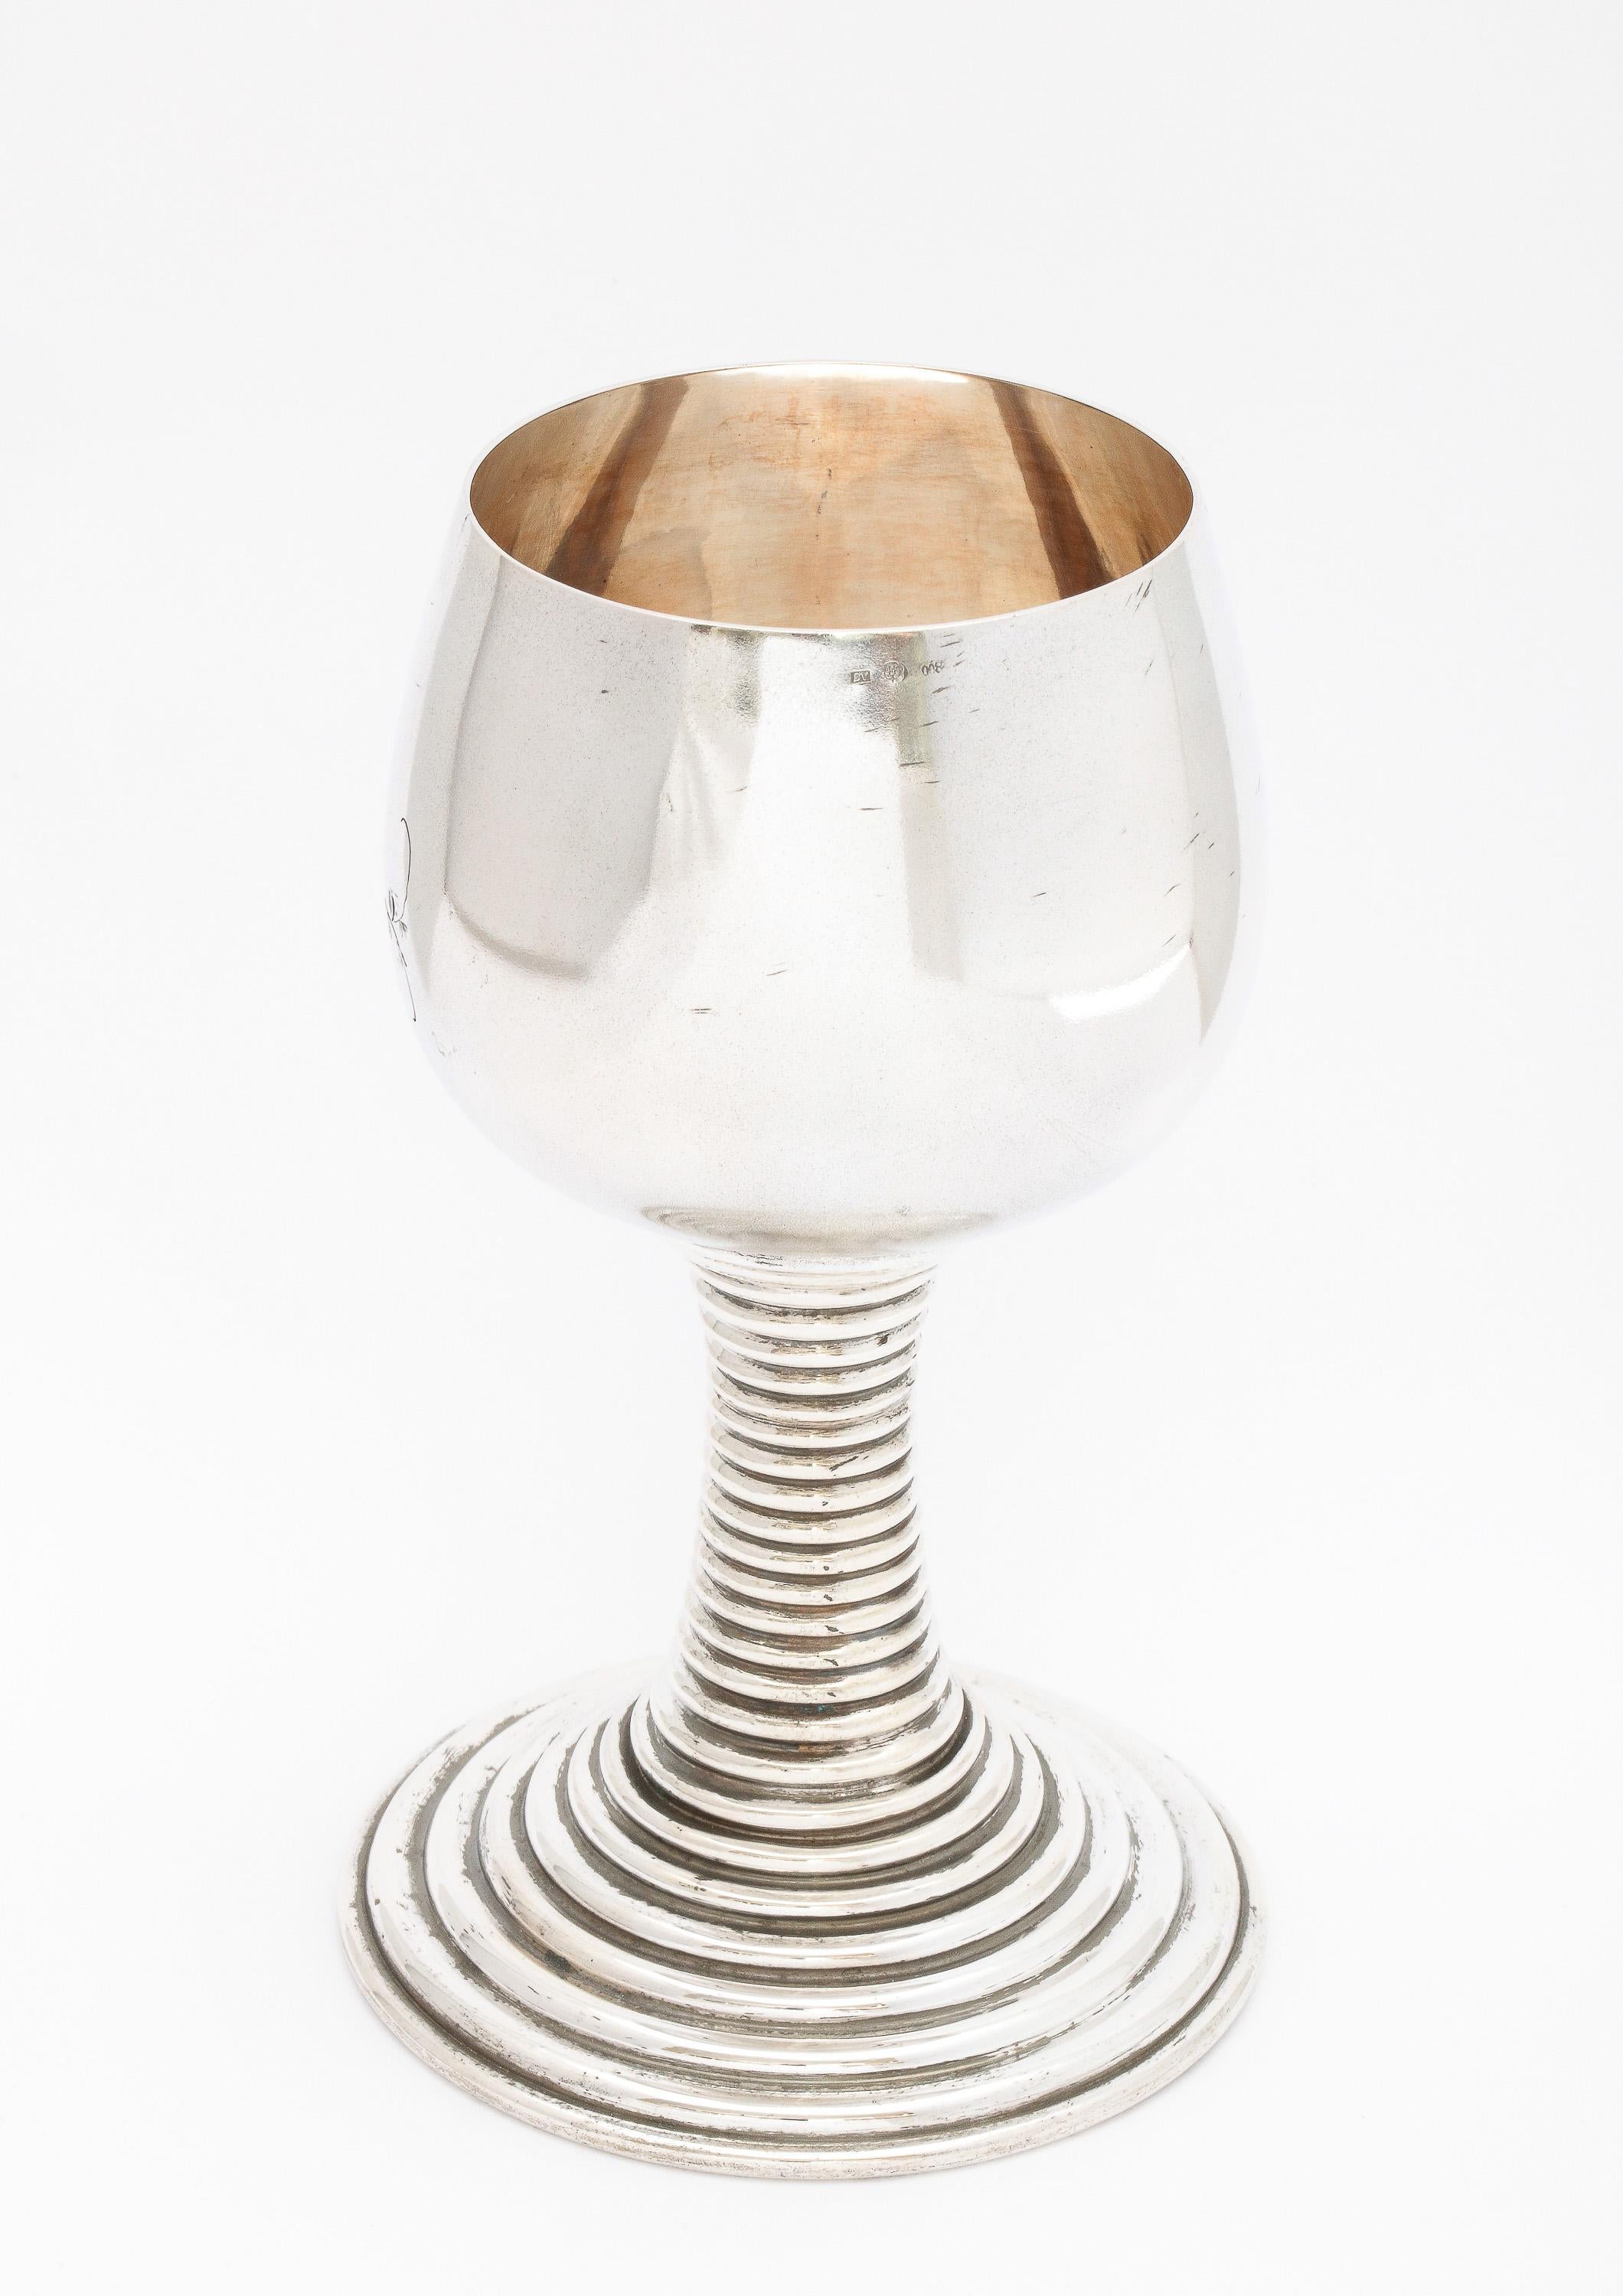 Medieval/15th Century-Style Continental Silver '.800' Roemer/ Rummer Goblet For Sale 1